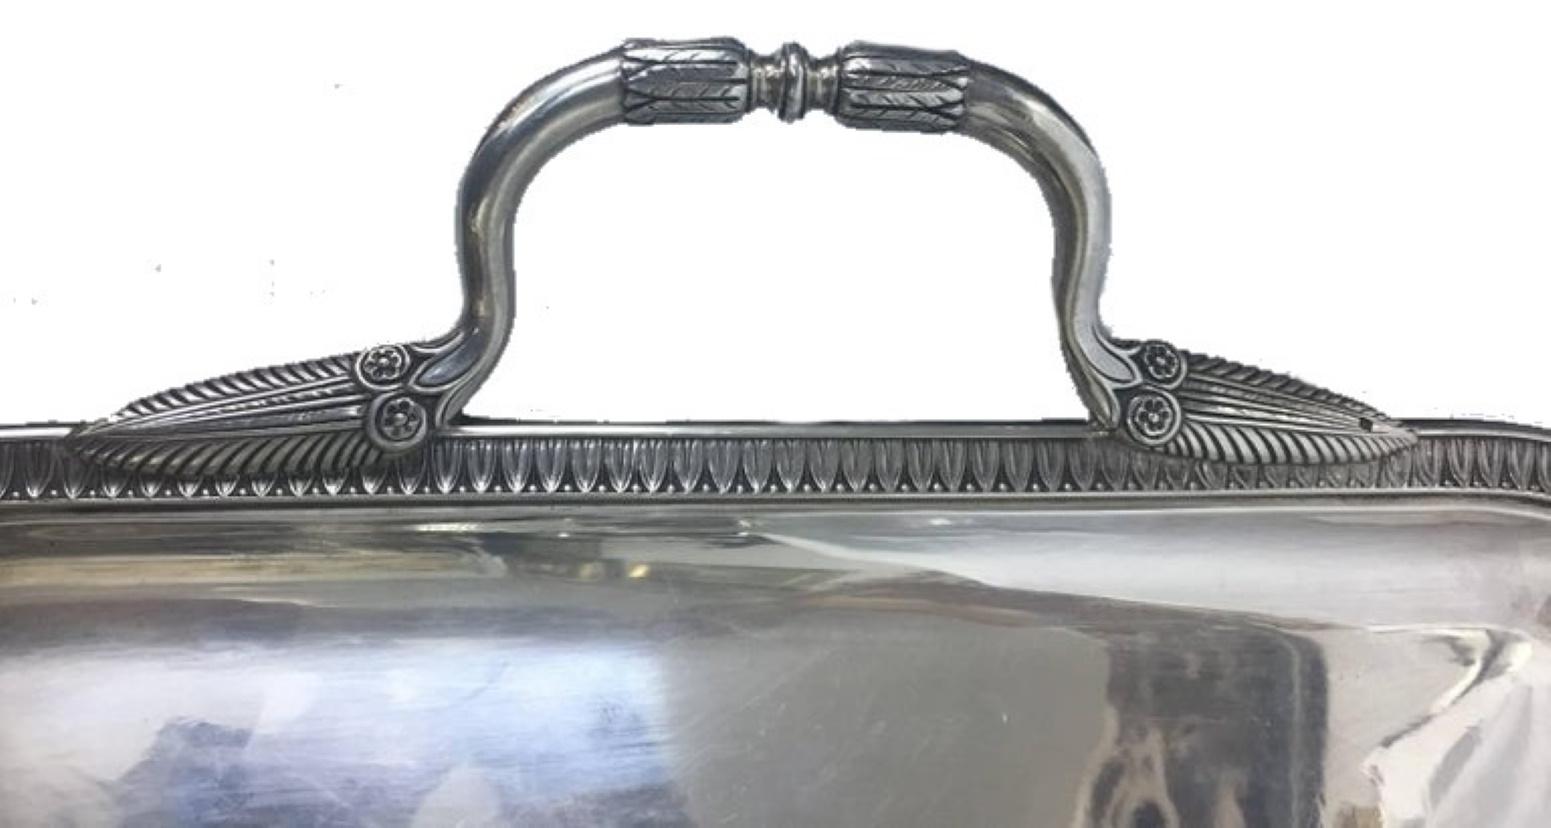 Dimensions: 
Length without handles: 2- inches
Length with handles; 24 inches
Width: 15 inches

Weight: 94oz

The House of Puiforcat story. 
This family cutler, founded in Paris in 1820 by Emile Puiforcat and his two cousins, owes most of its renown